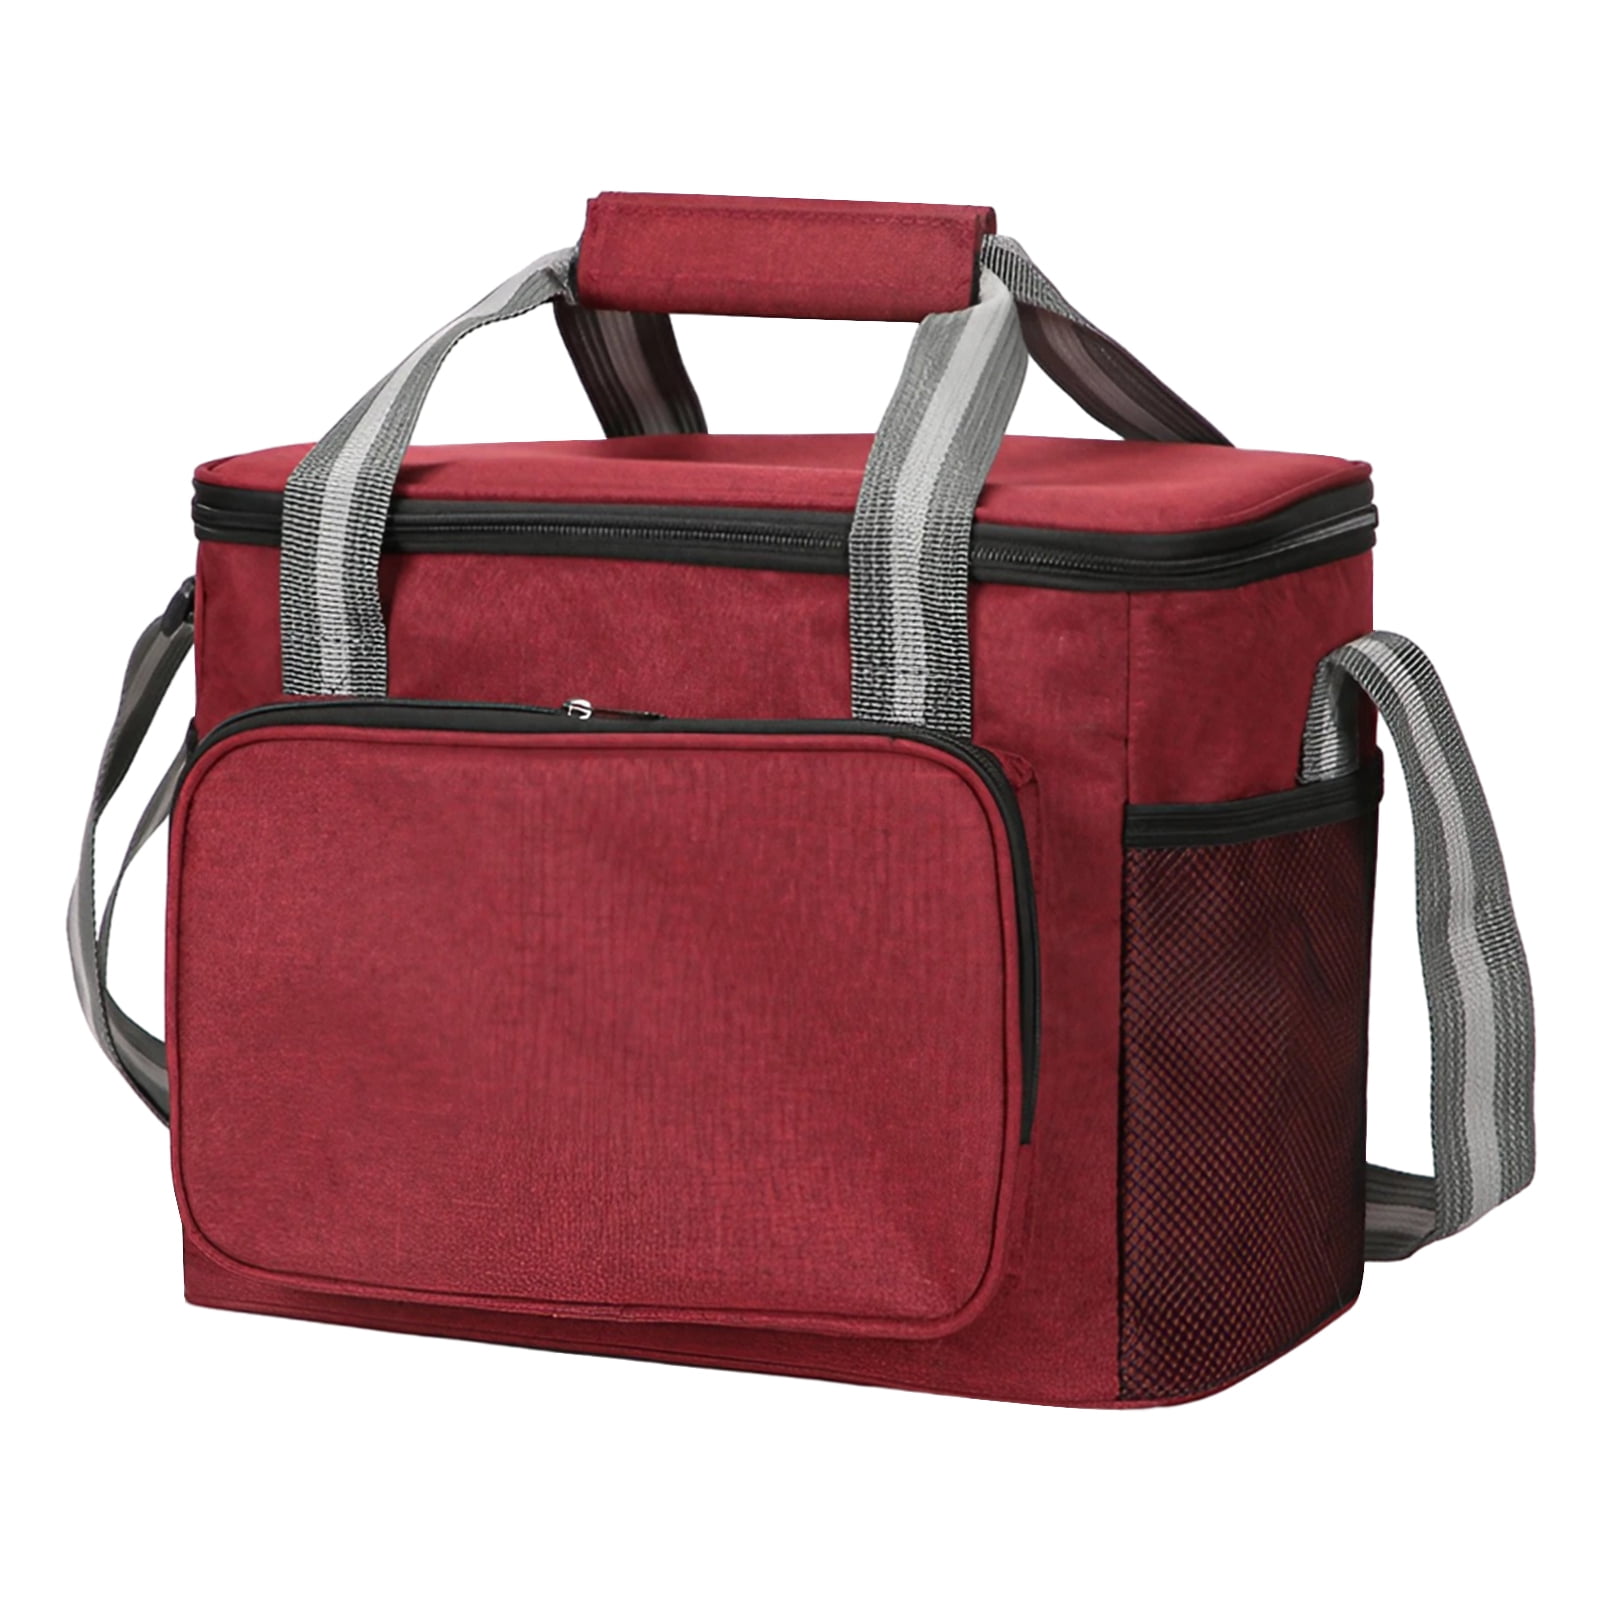 VARANO Lunch Bag Insulated - Lunch Box for Women